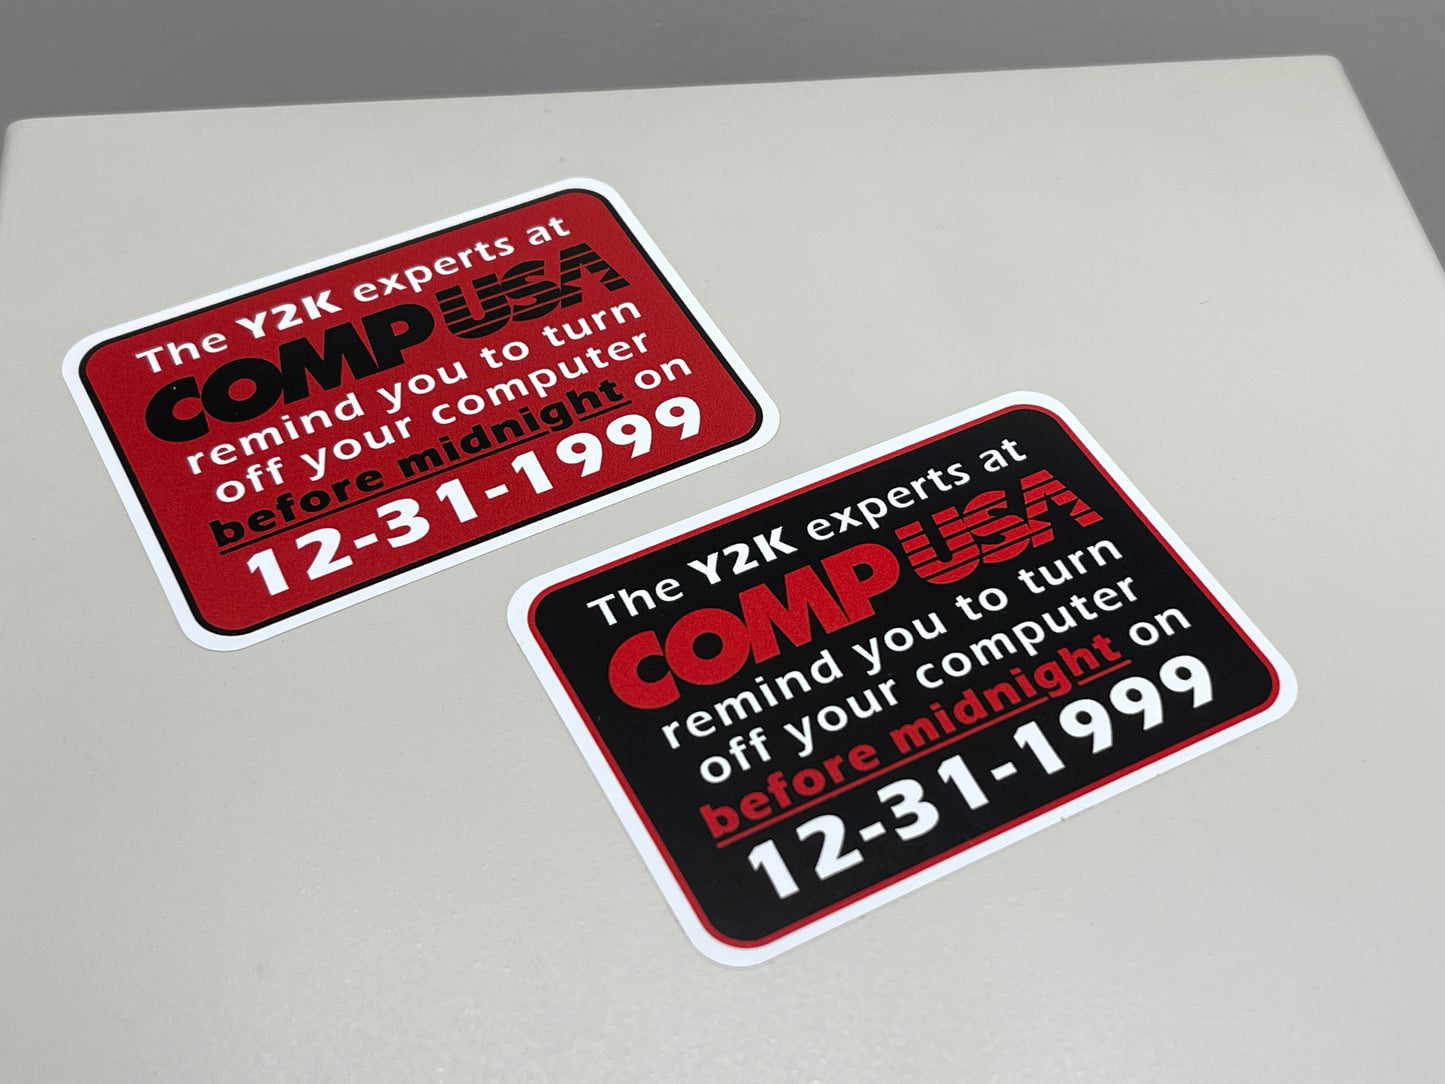 Y2k Year 2000 CompUSA Experts “What if…” Stickers (2)